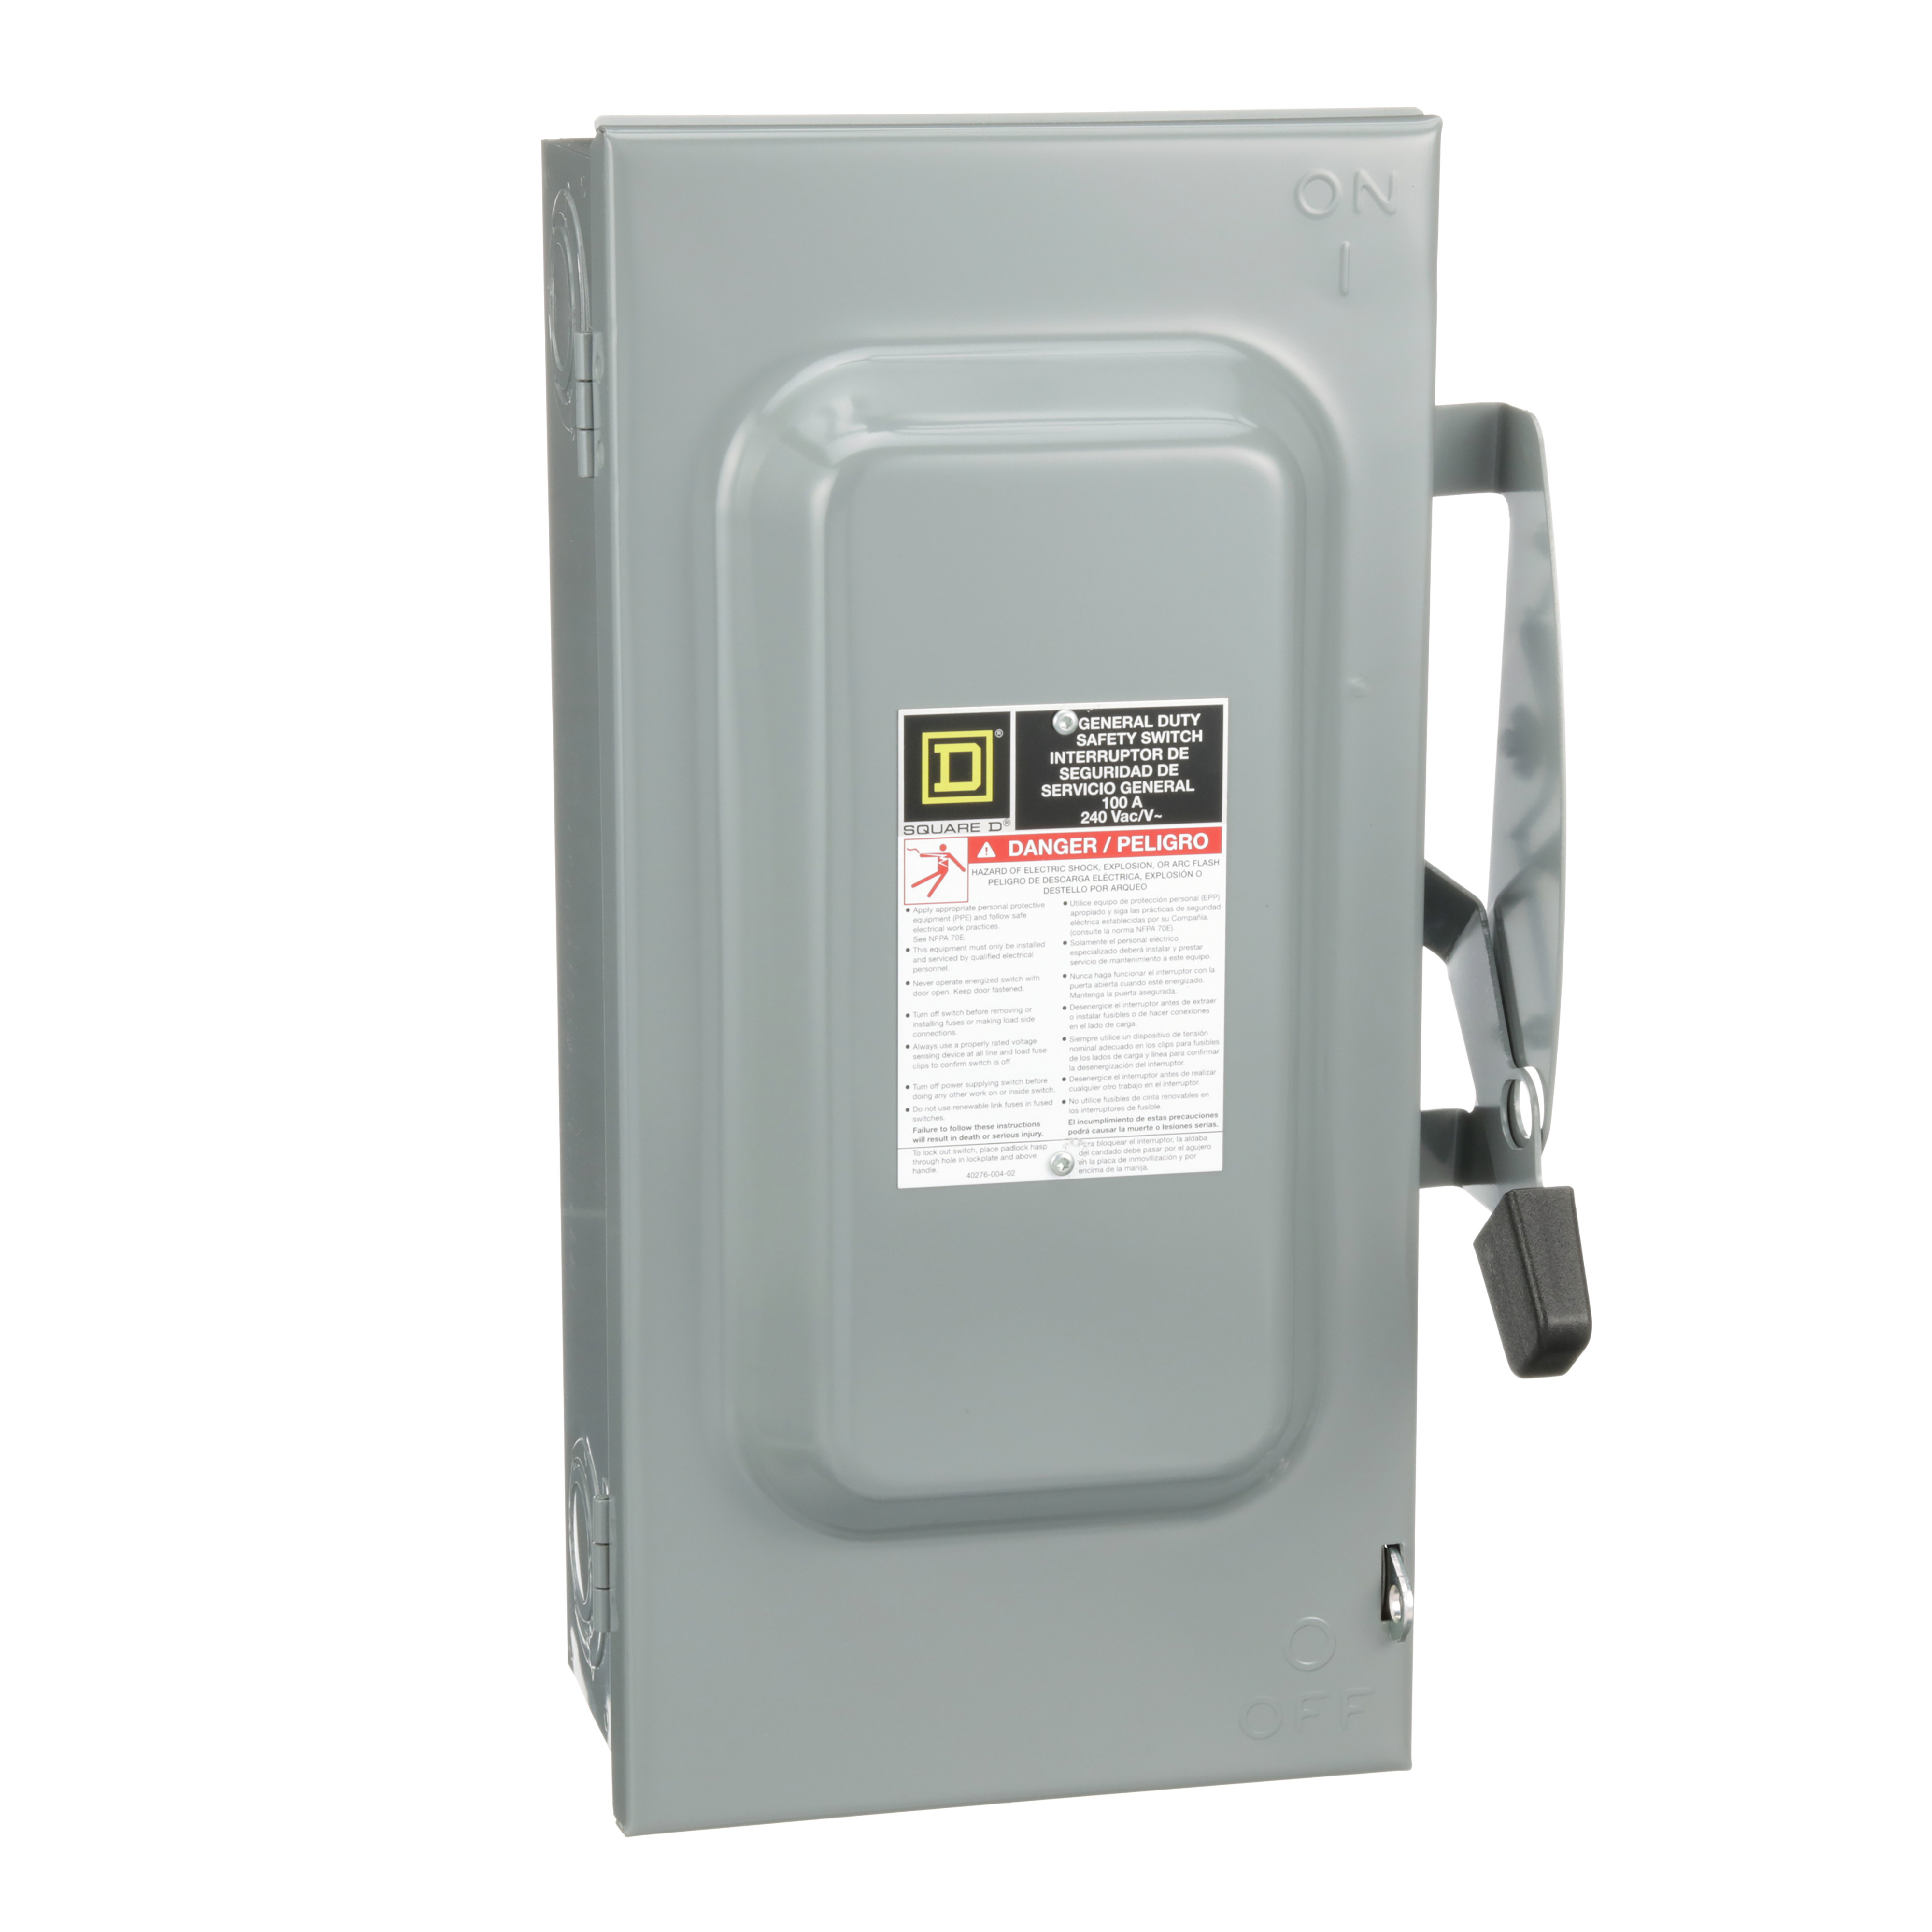 Safety switch, general duty, non fusible, 100A, 3 pole, 30hp, 240VAC, NEMA 1